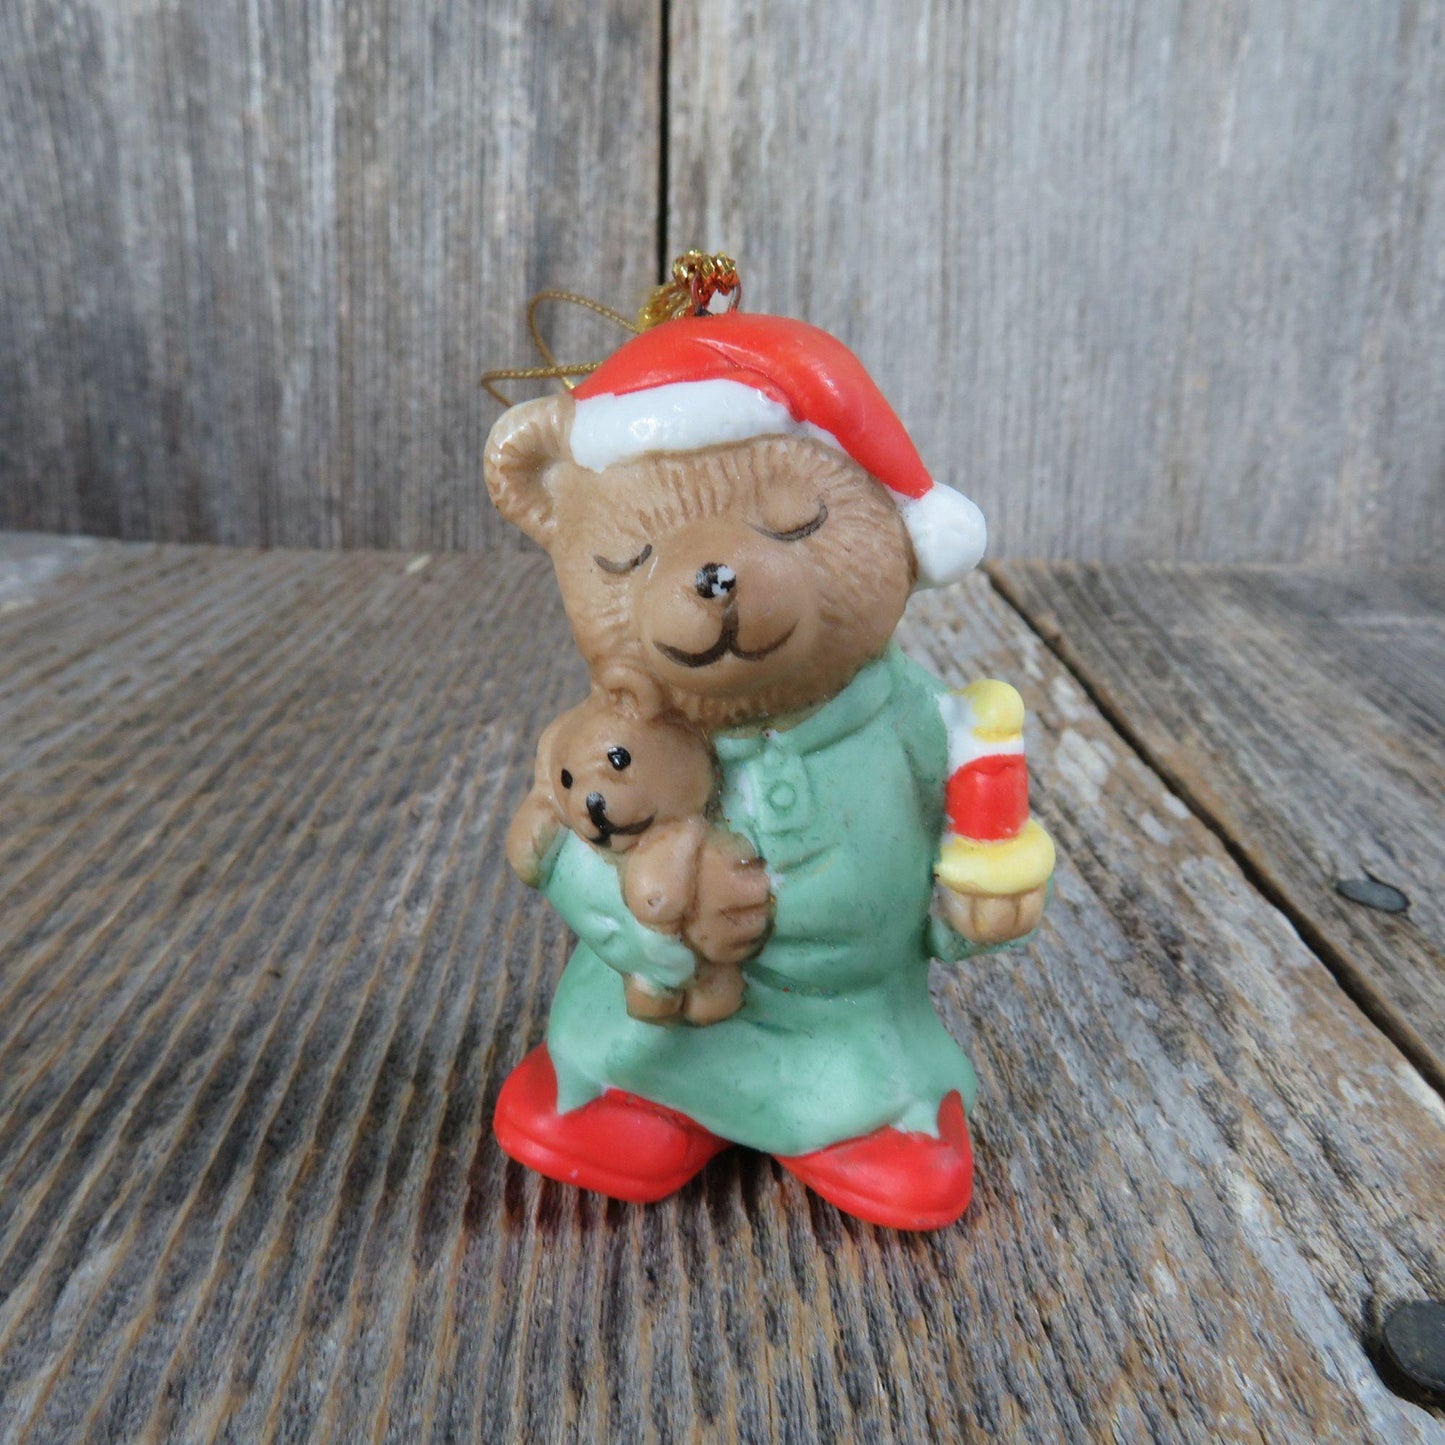 Vintage Bear In Pajamas Teddy and Candle Ornament Ceramic Porcelain Christmas